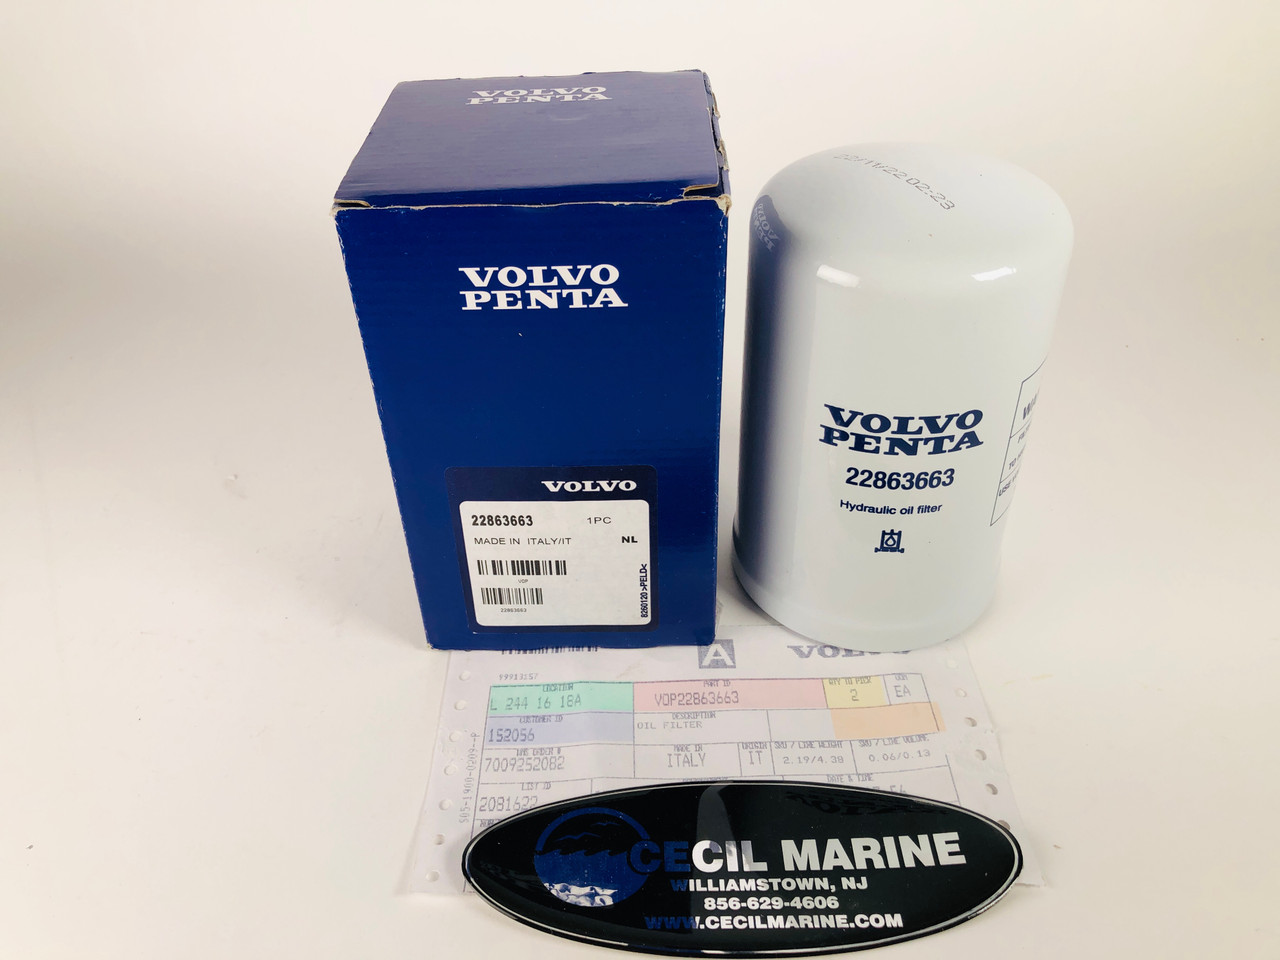 $134.99* GENUINE VOLVO no tax* OIL FILTER 22863663 *In Stock & Ready To Ship!